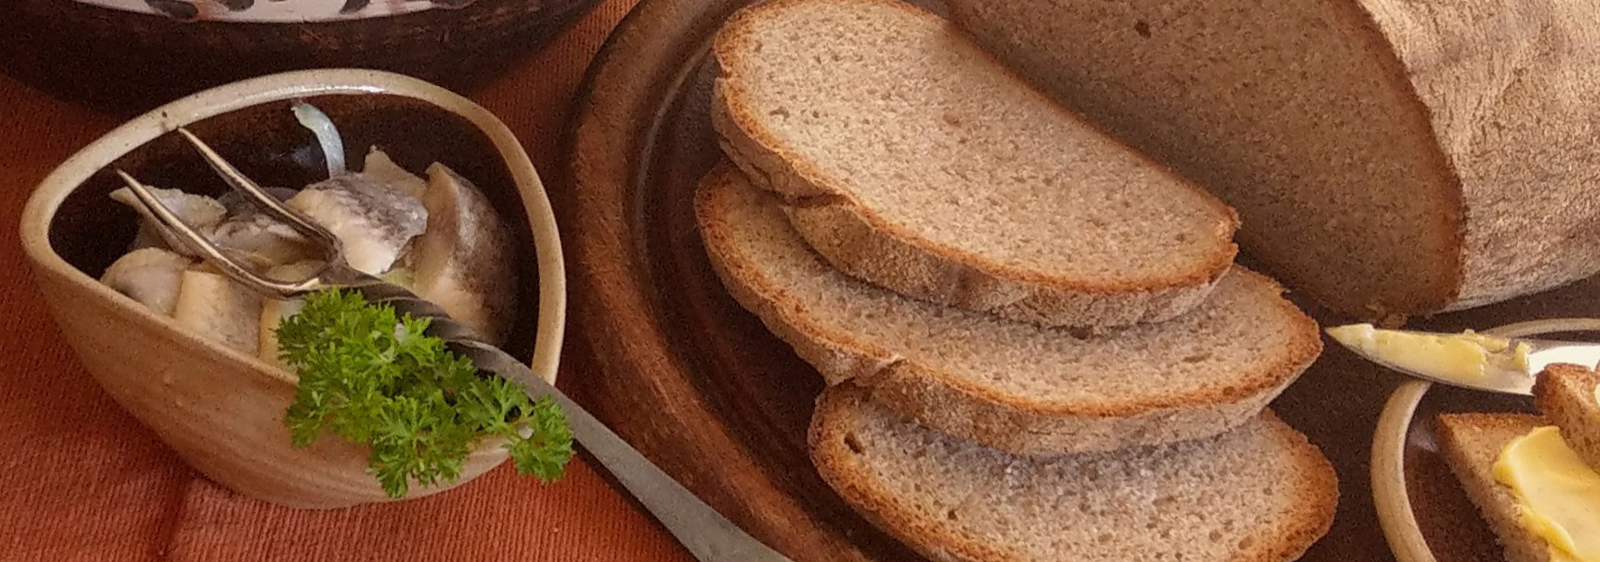 Maslin-style Country Brown Bread